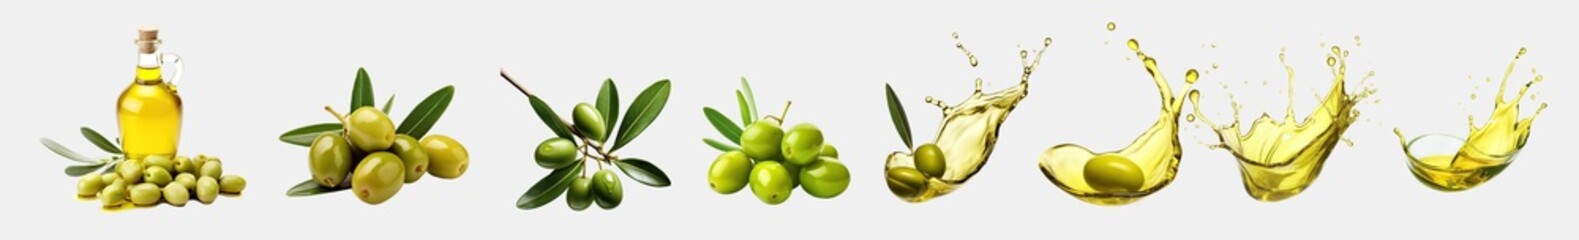 Set of bottle of olive oil, Olive branches and Splash of olive oil isolated cutout on transparent background.